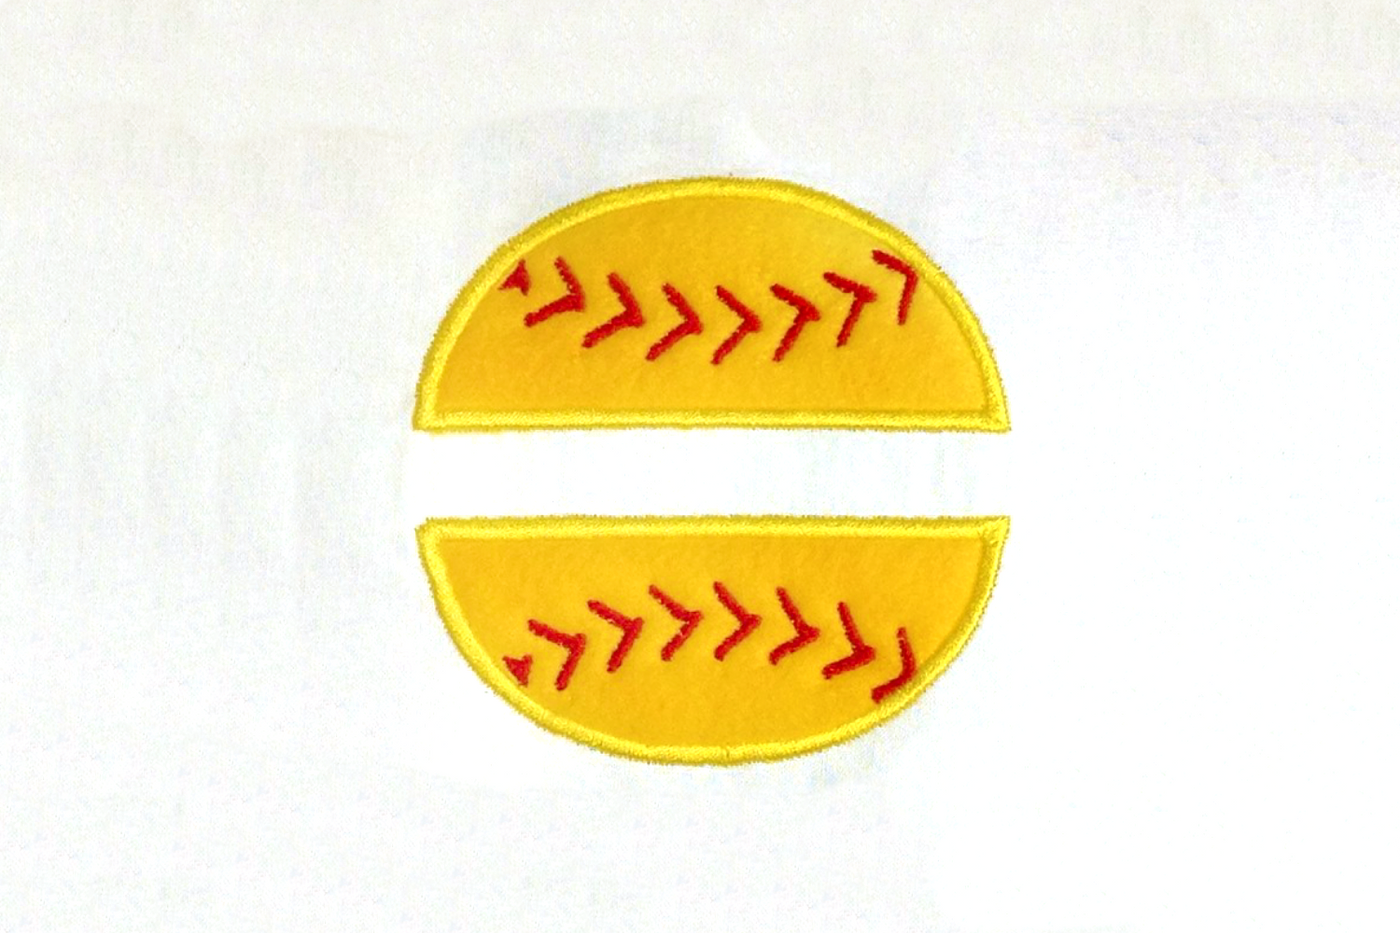 Embroidered onto a white piece of fabric is a yellow applique softball with red stitching and a split space in the middle.